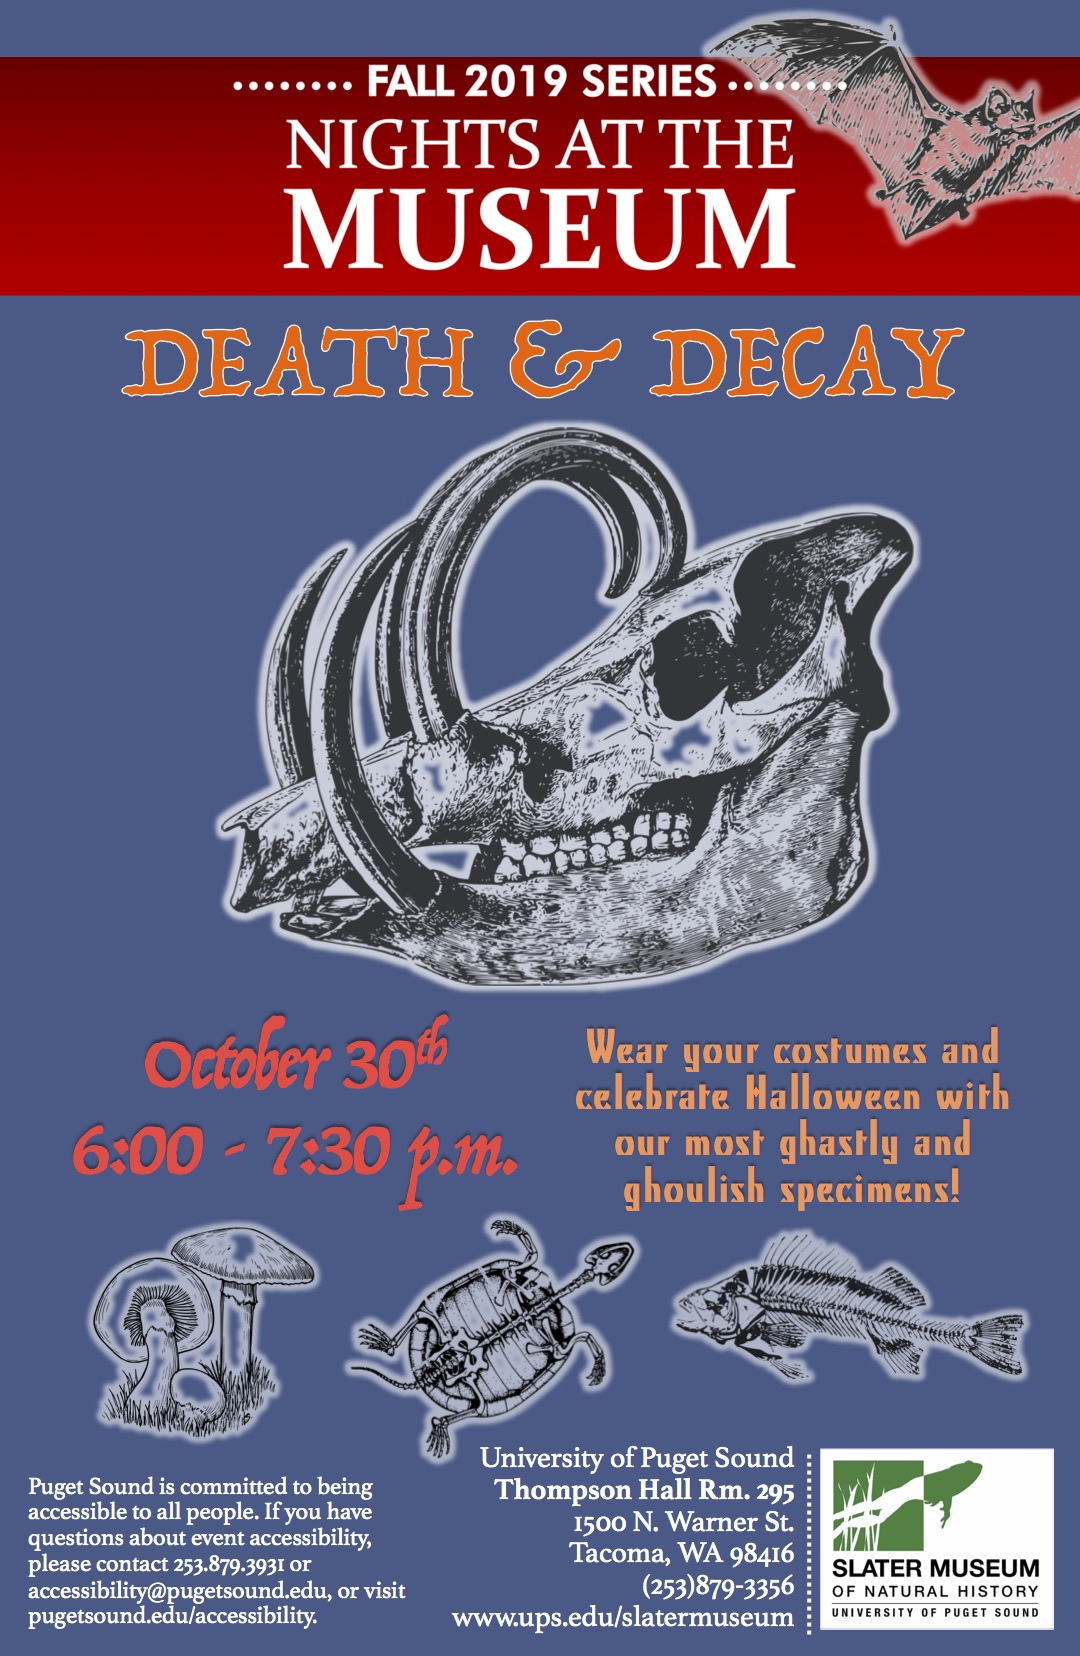 Night at the Museum Death & Decay event poster